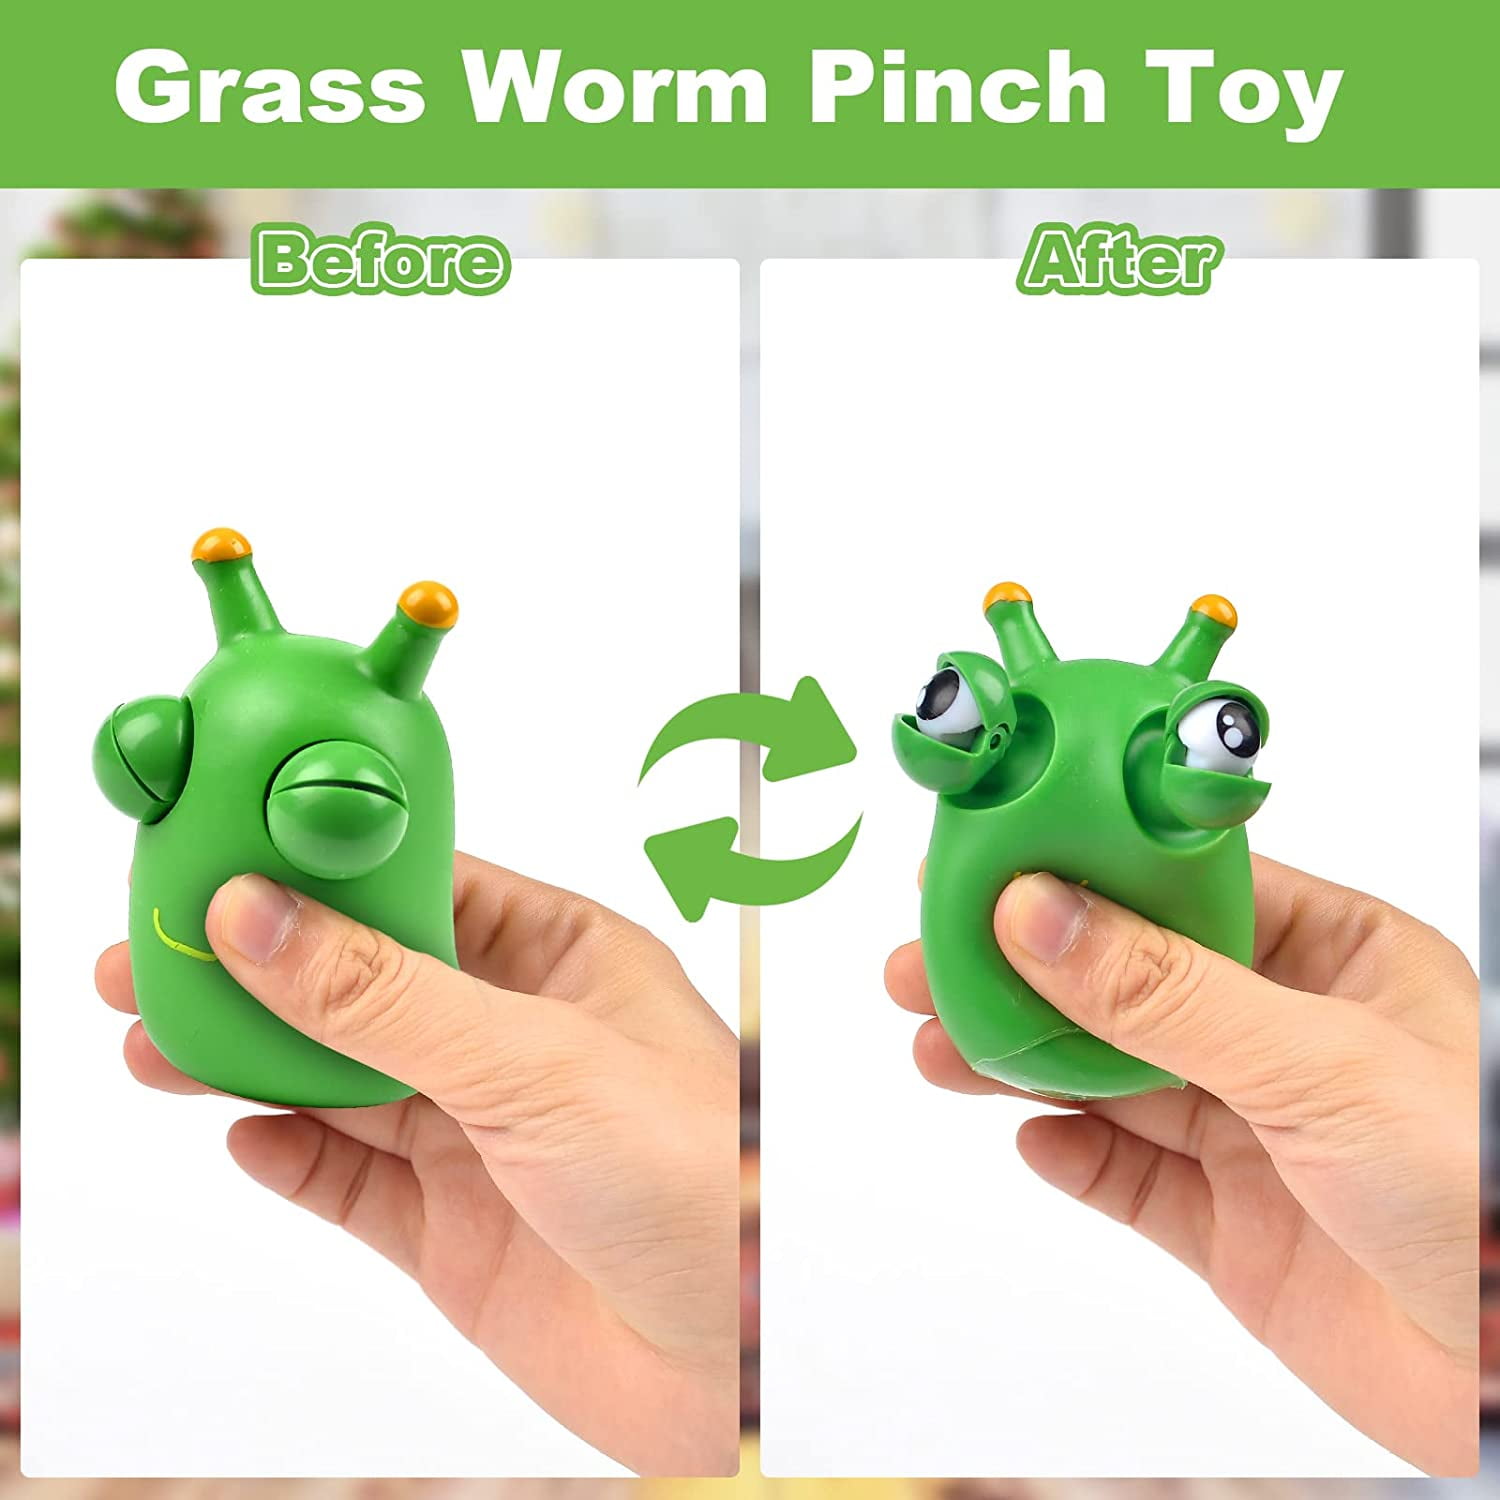 1Pcs Funny Grass Worm Pinch Toy, Eyeball Popping Squeeze Toy, Green Eye Bouncing Worm Toy, Novelty 3D Grass Worm Fidget Toy, for Adult Children Relieve Sensory Anxiety Stress